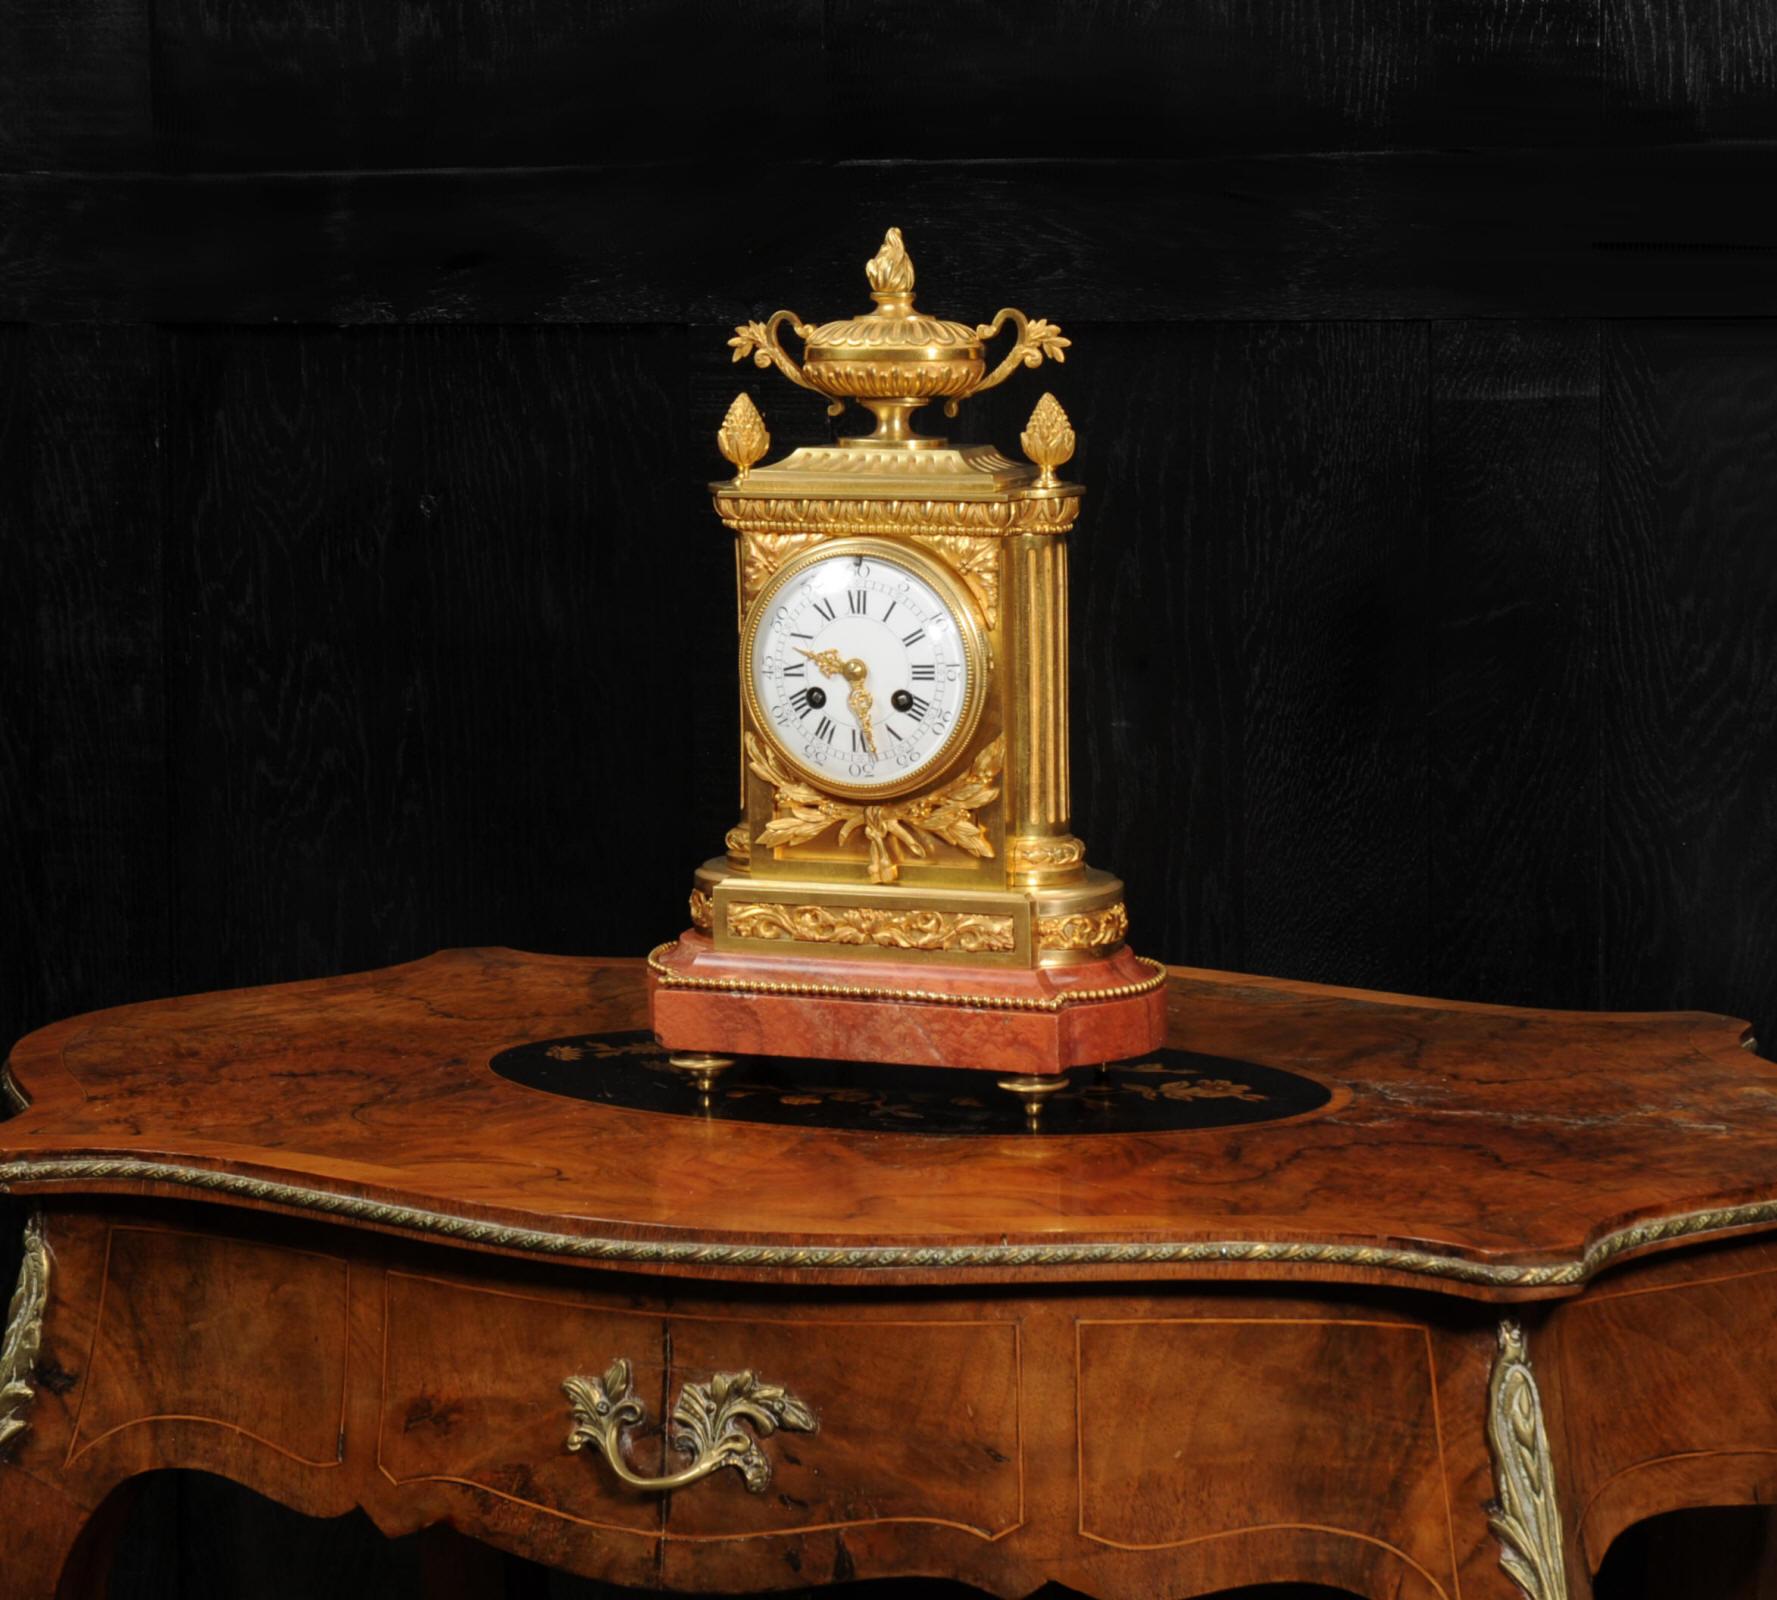 19th Century Ormolu and Marble Louis XVI Antique French Clock by Charpentier & Cie, Paris